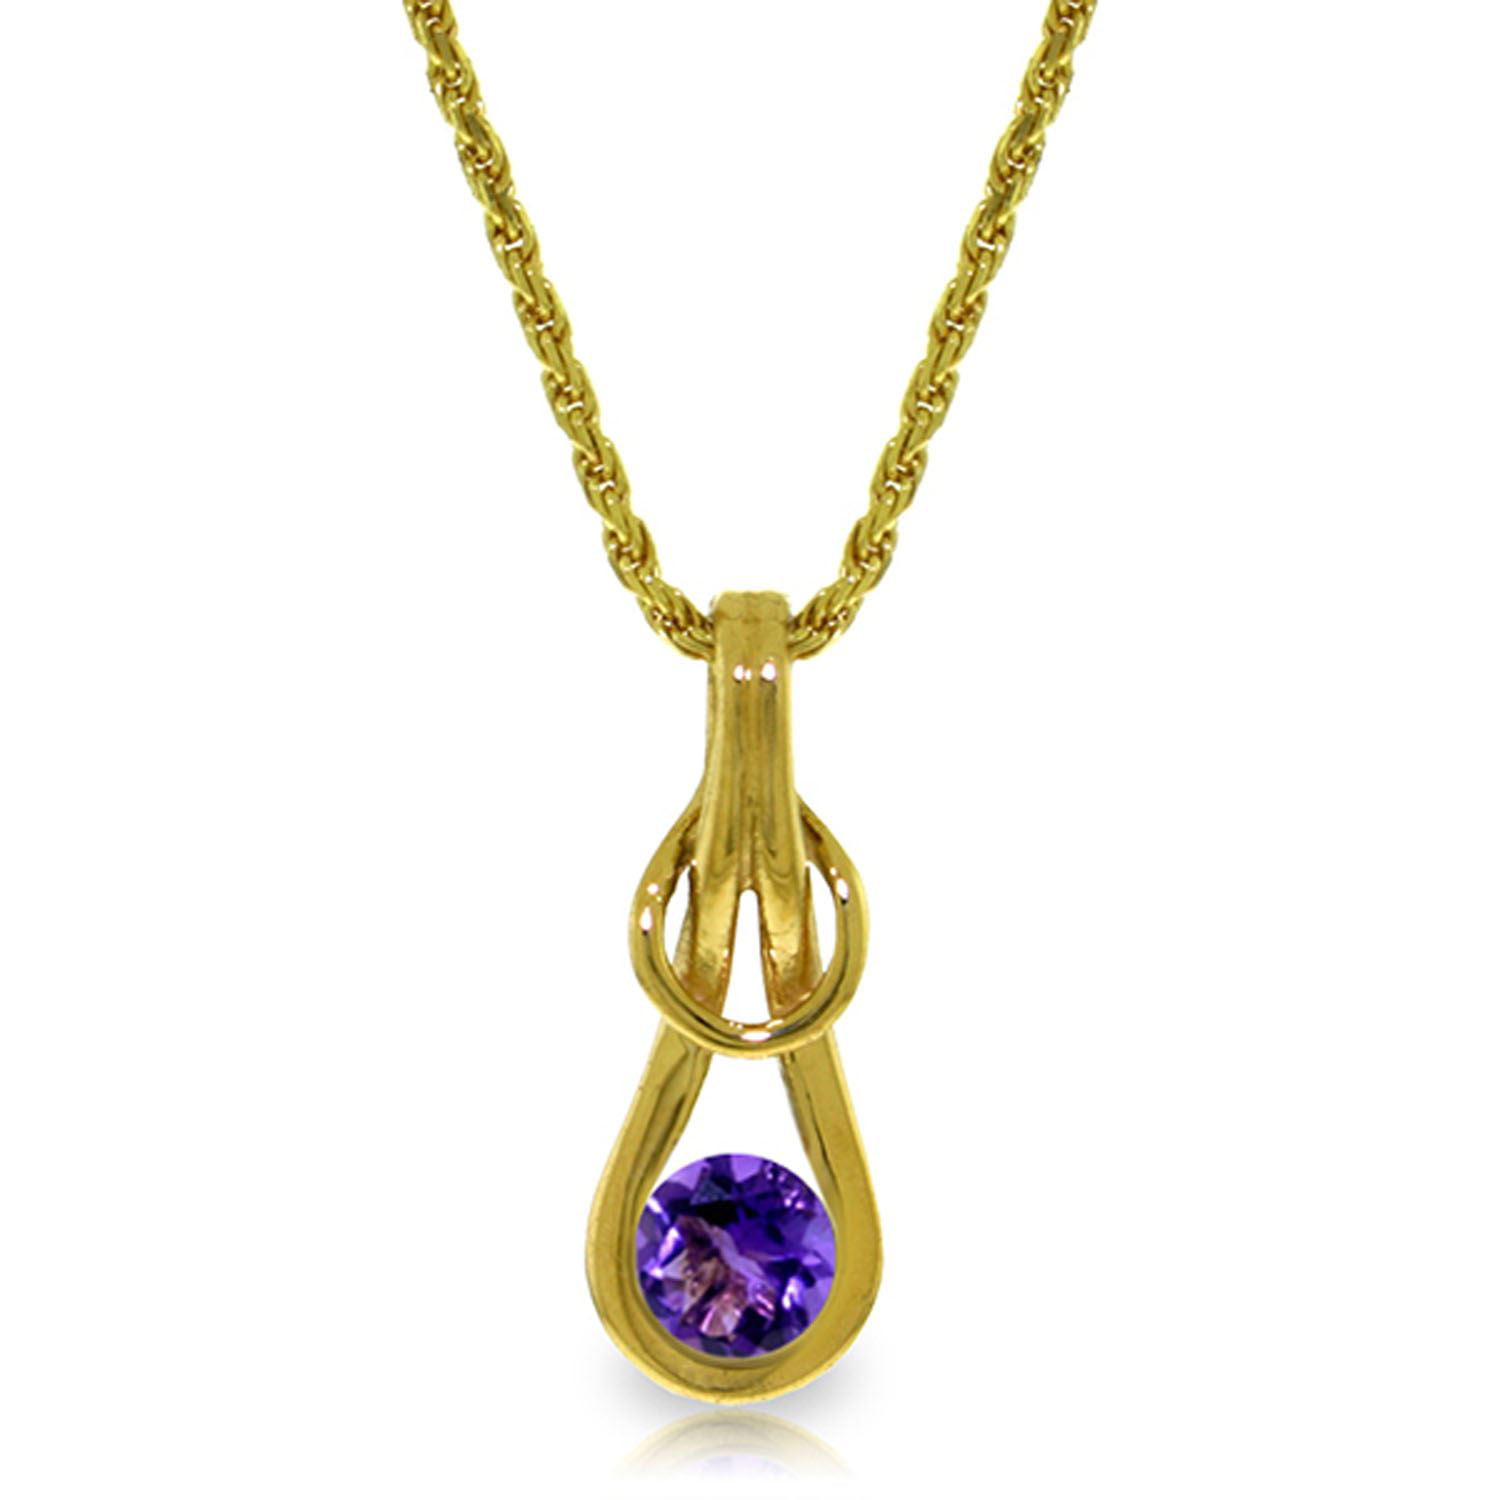 ALARRI 1.23 CTW 14K Solid White Gold Necklace Natural Diamond Purple Amethyst with 22 Inch Chain Length